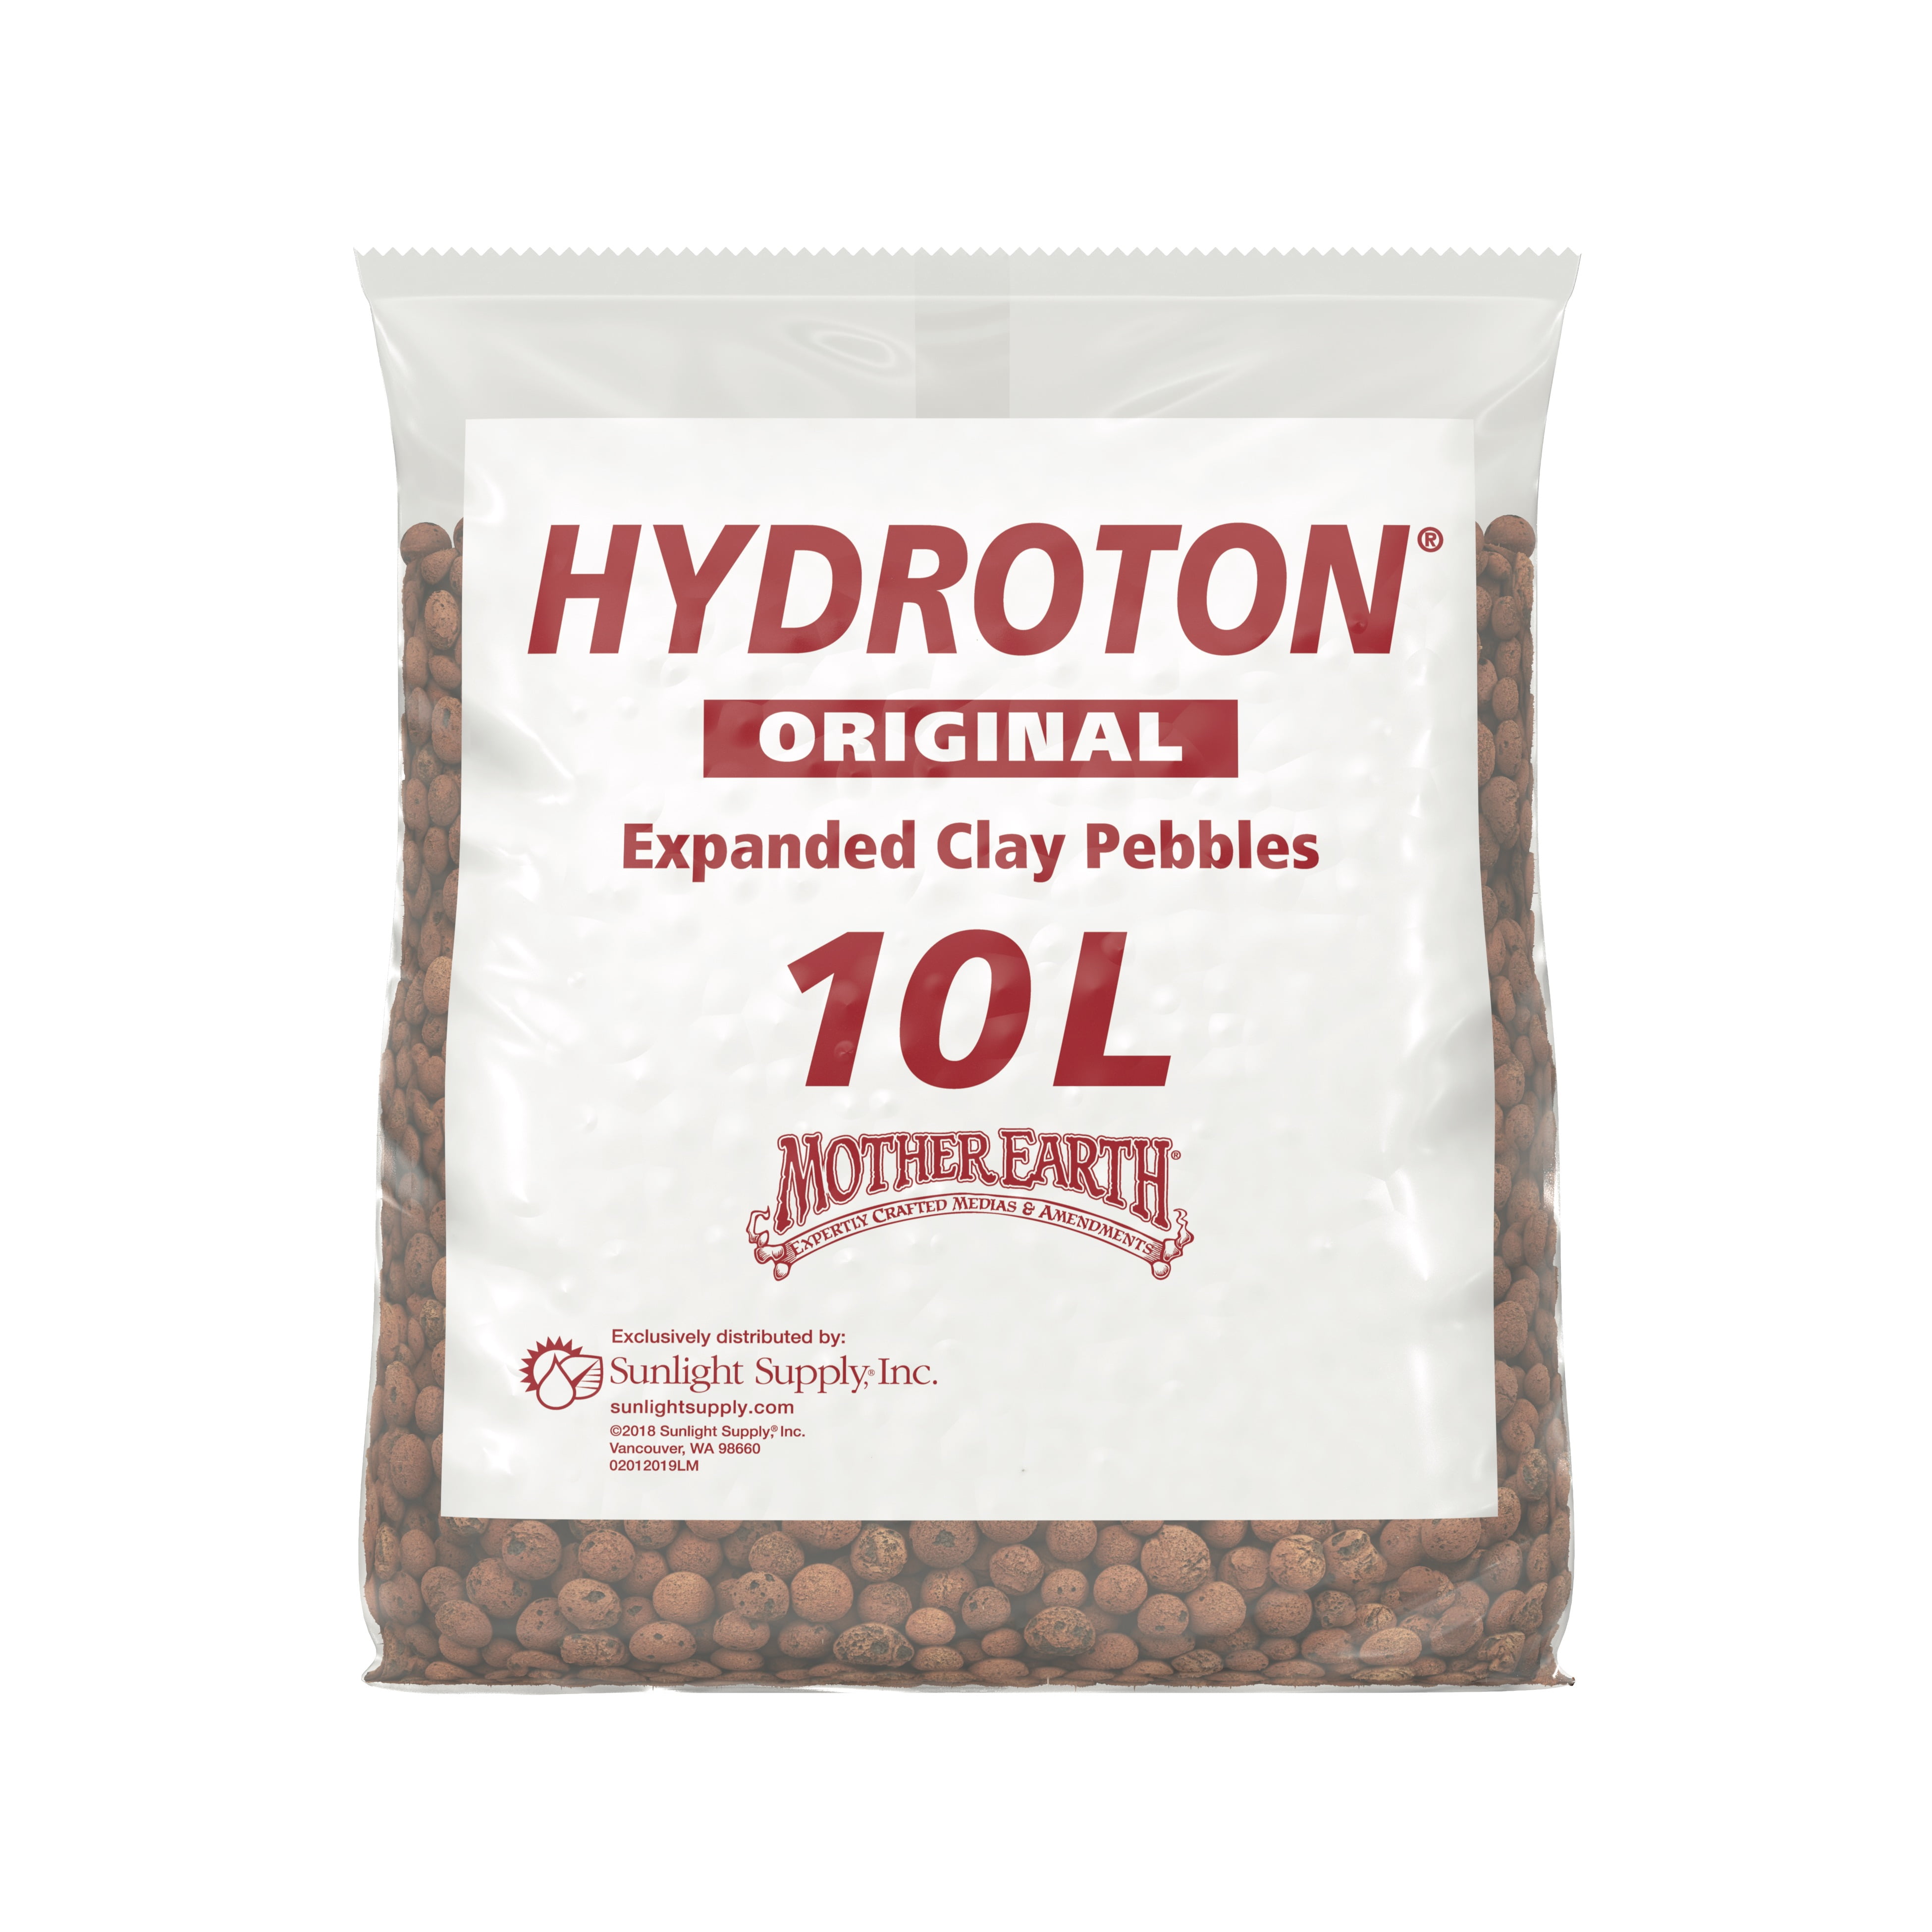 Hydroton clay pebbles growing media expanded clay rocks for hydroponic systemsTO 